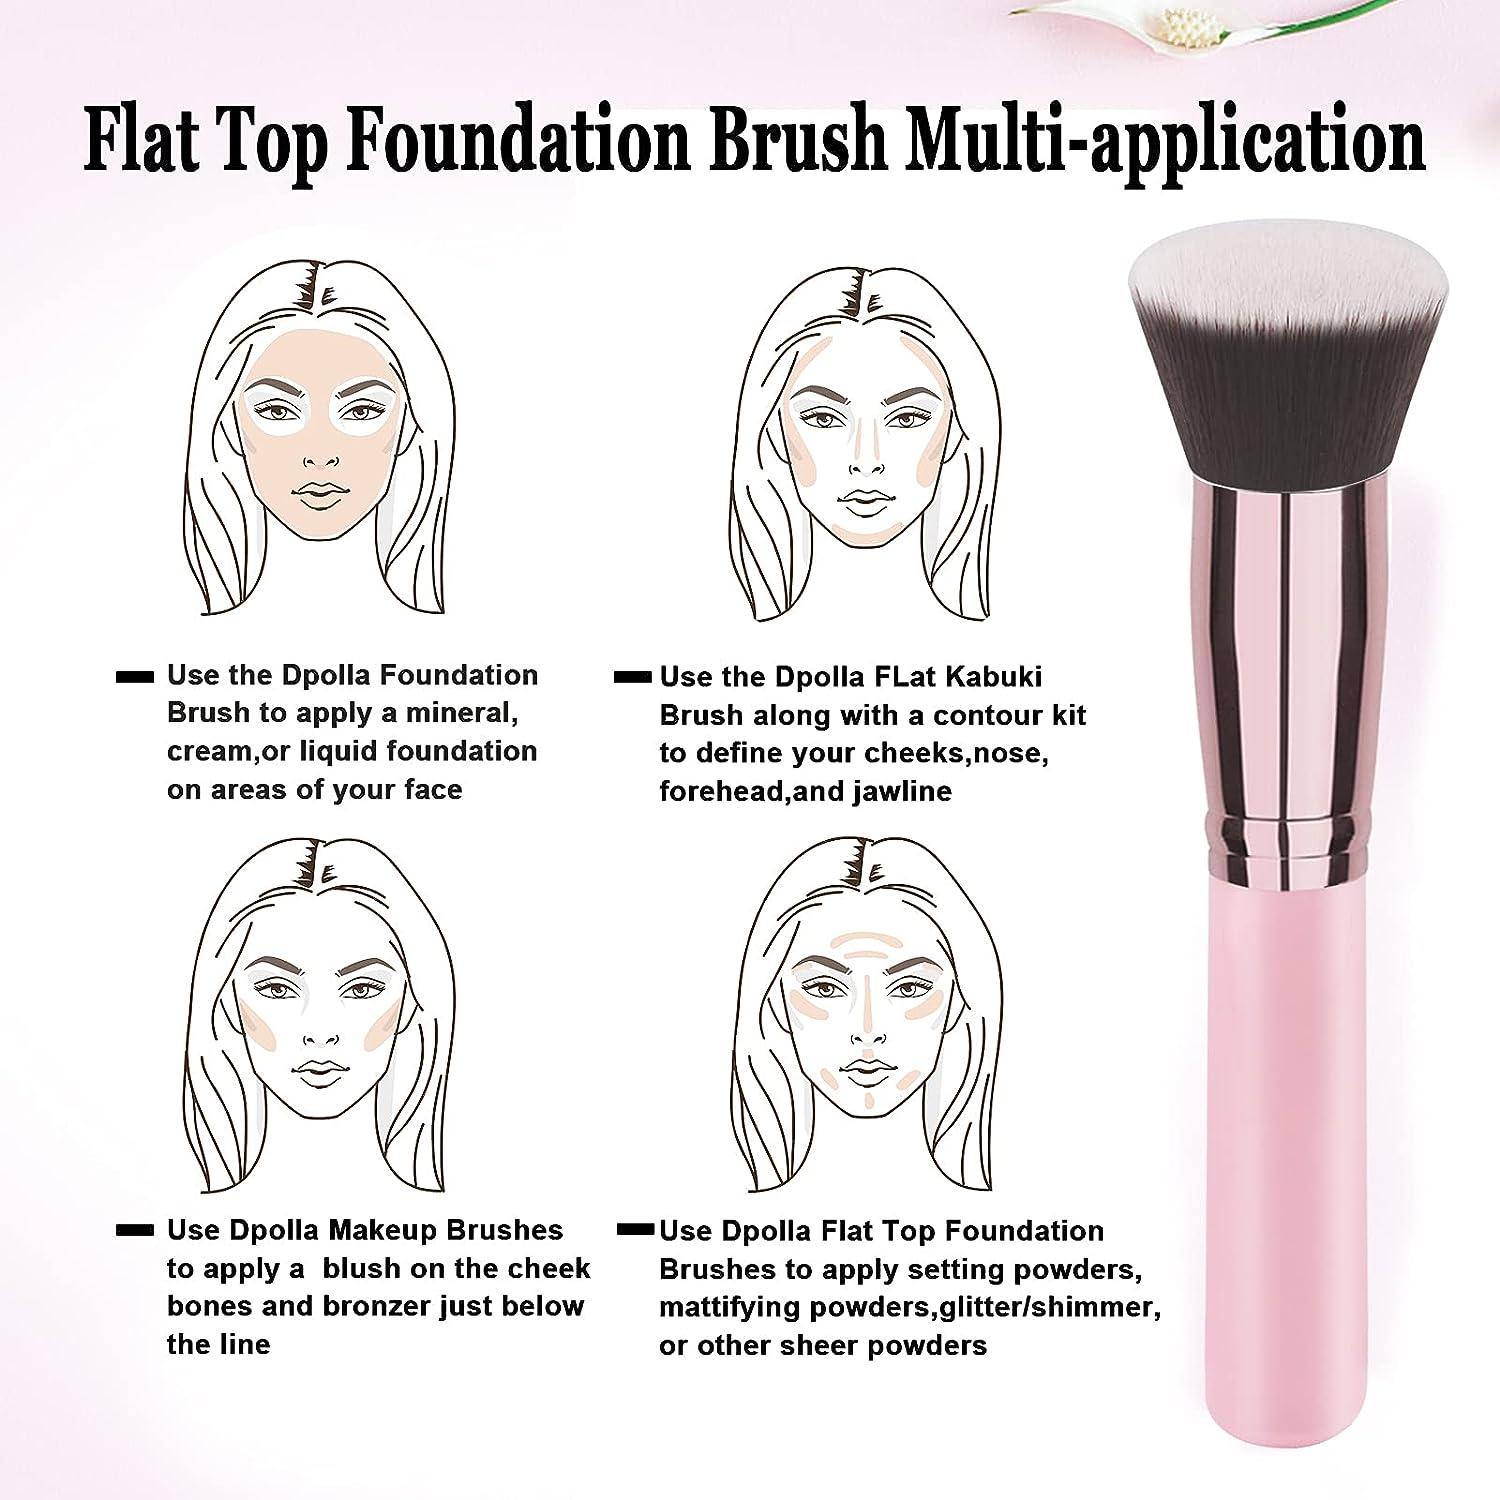 Flat Top Foundation Brush Premium Stippling - Quality Synthetic